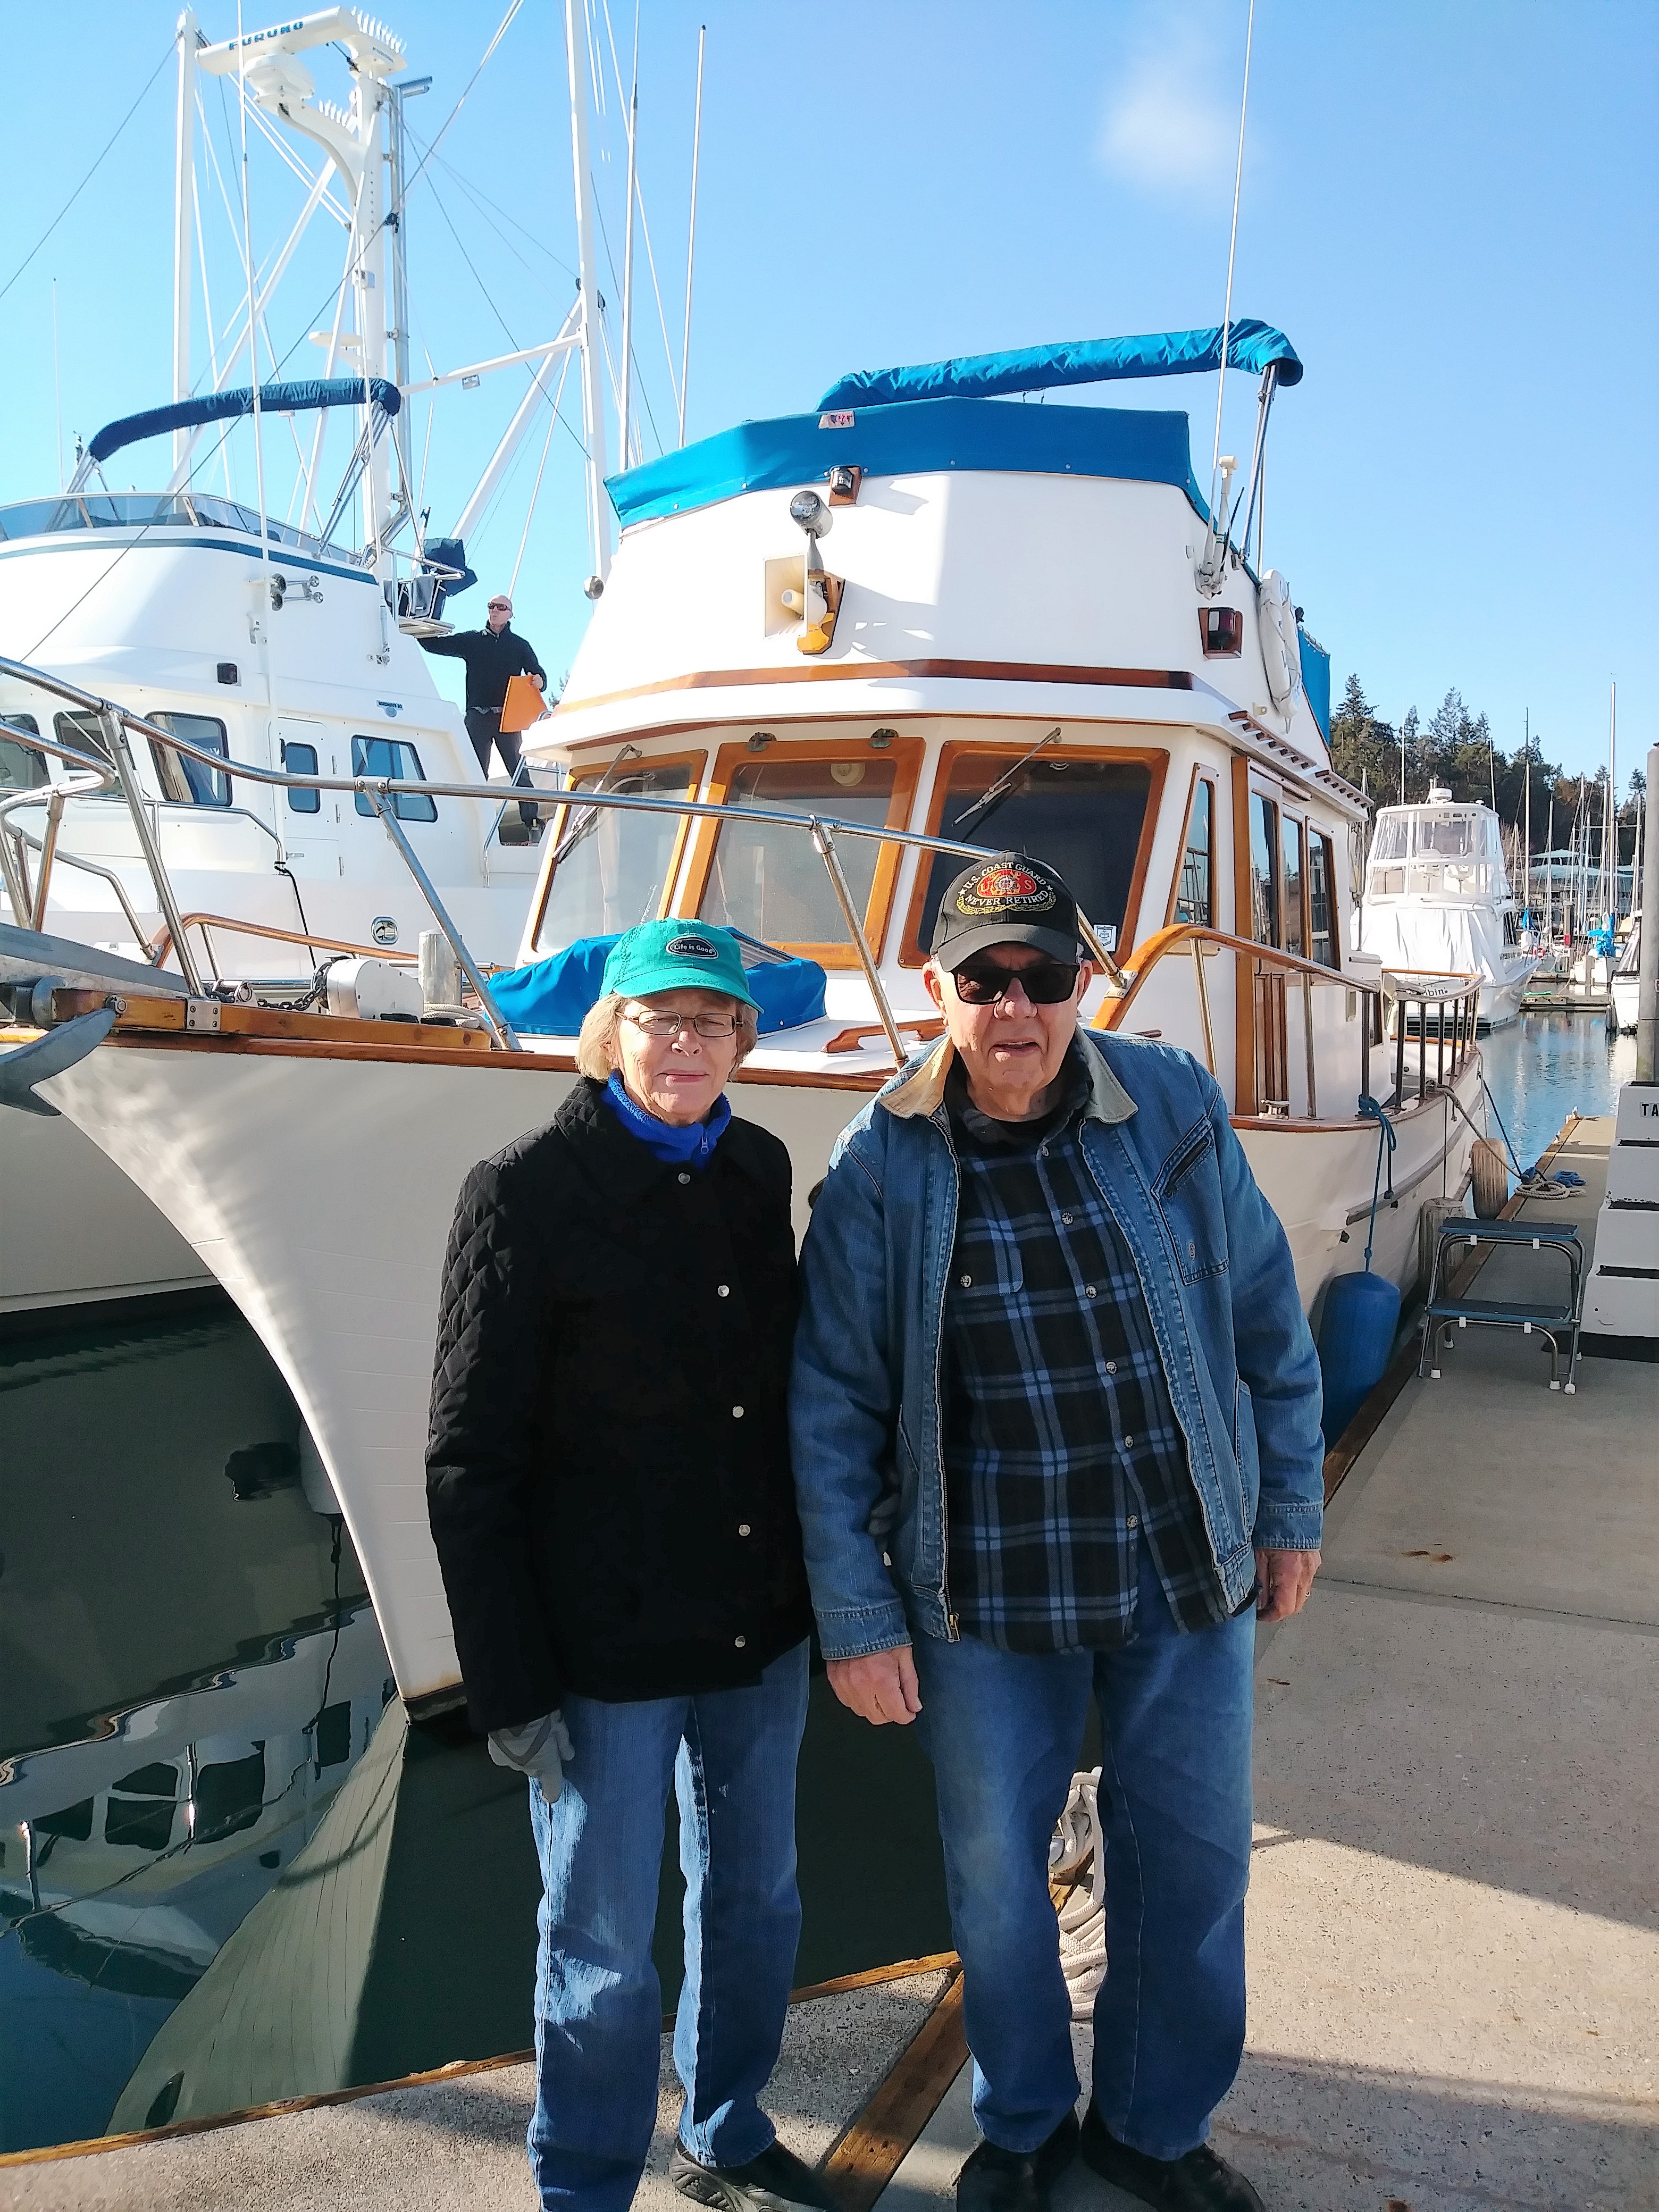 Grace & Dick Schoel by their new boat "Eagles Nest"